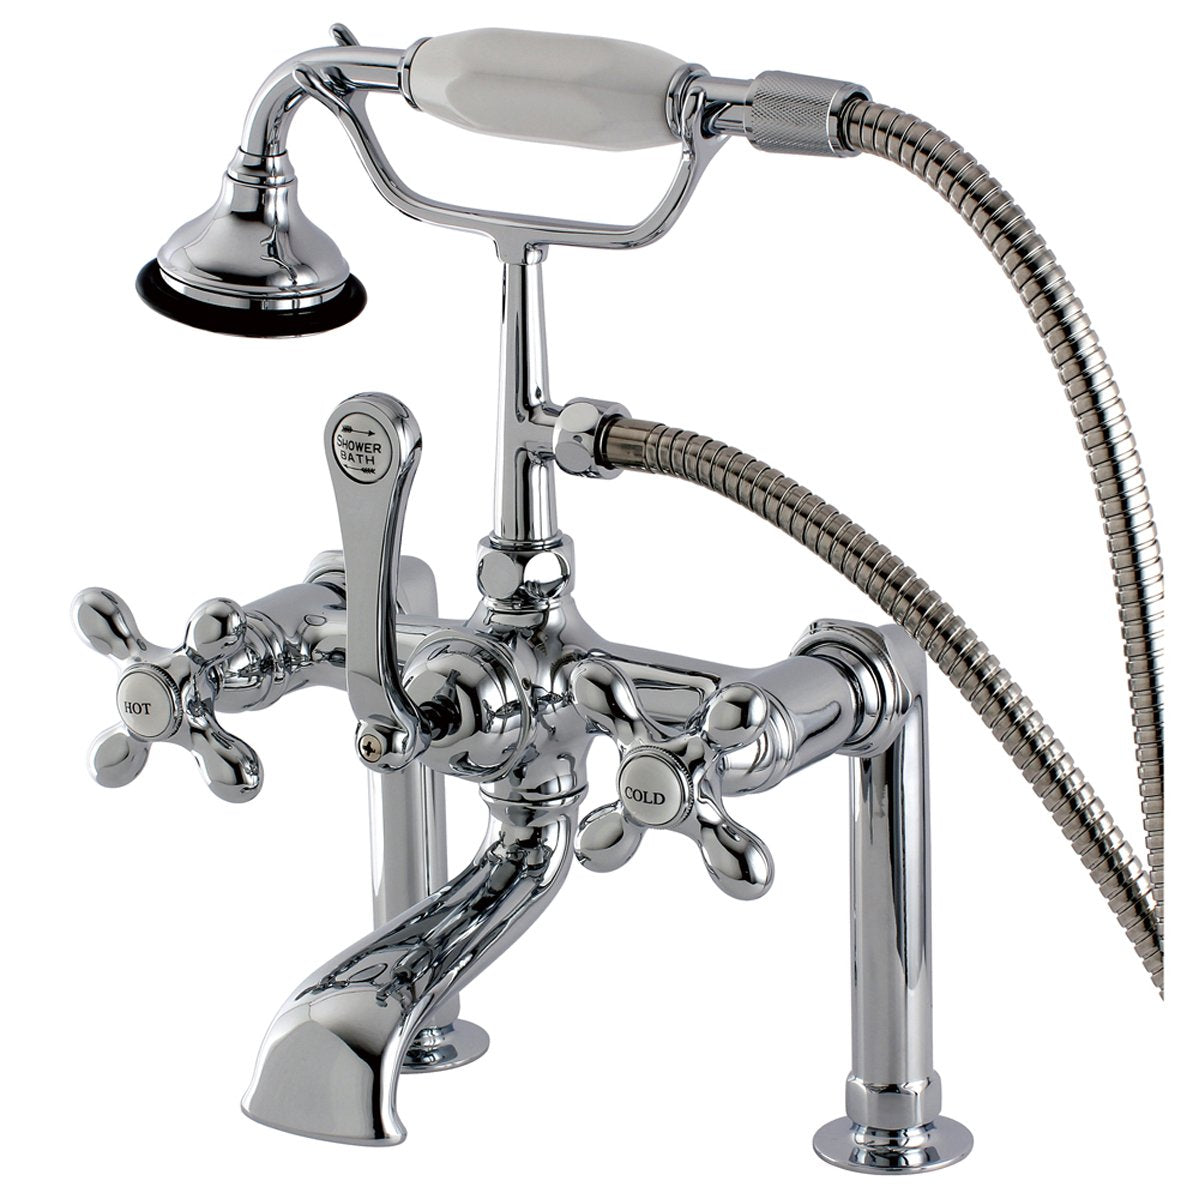 Kingston Brass Aqua Eden Vintage Deck Mount Clawfoot Tub Faucet with Metal Cross Handle-Tub Faucets-Free Shipping-Directsinks.